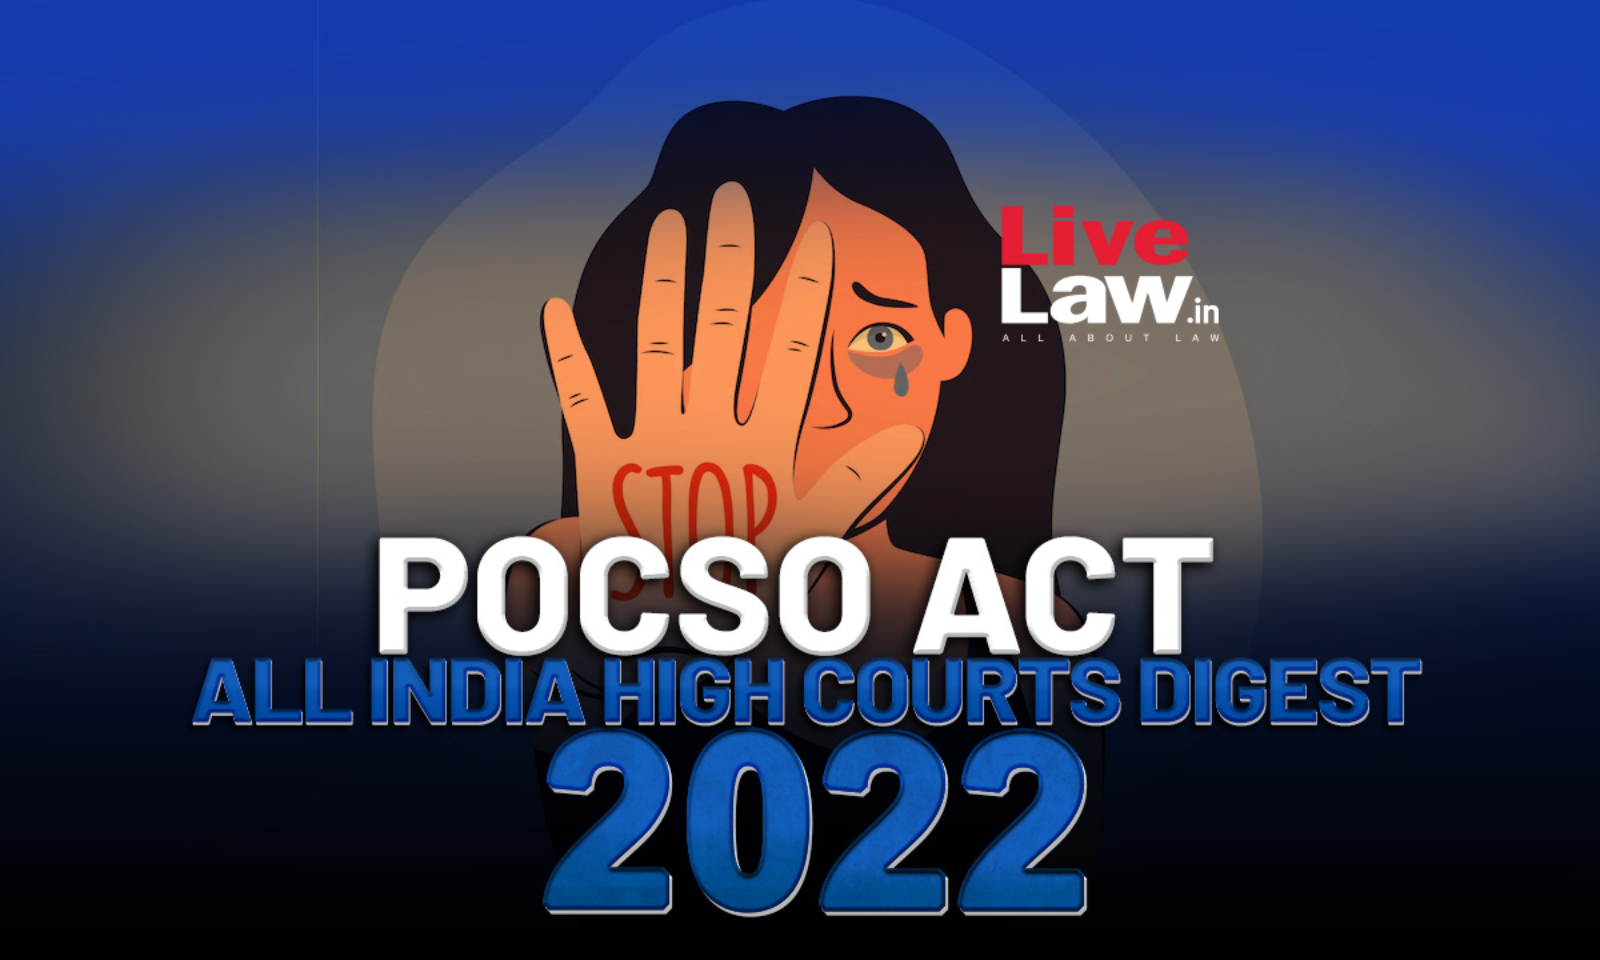 Rape 18year Sex Beauti Ful Indan - POCSO Act: All India High Courts Digest 2022